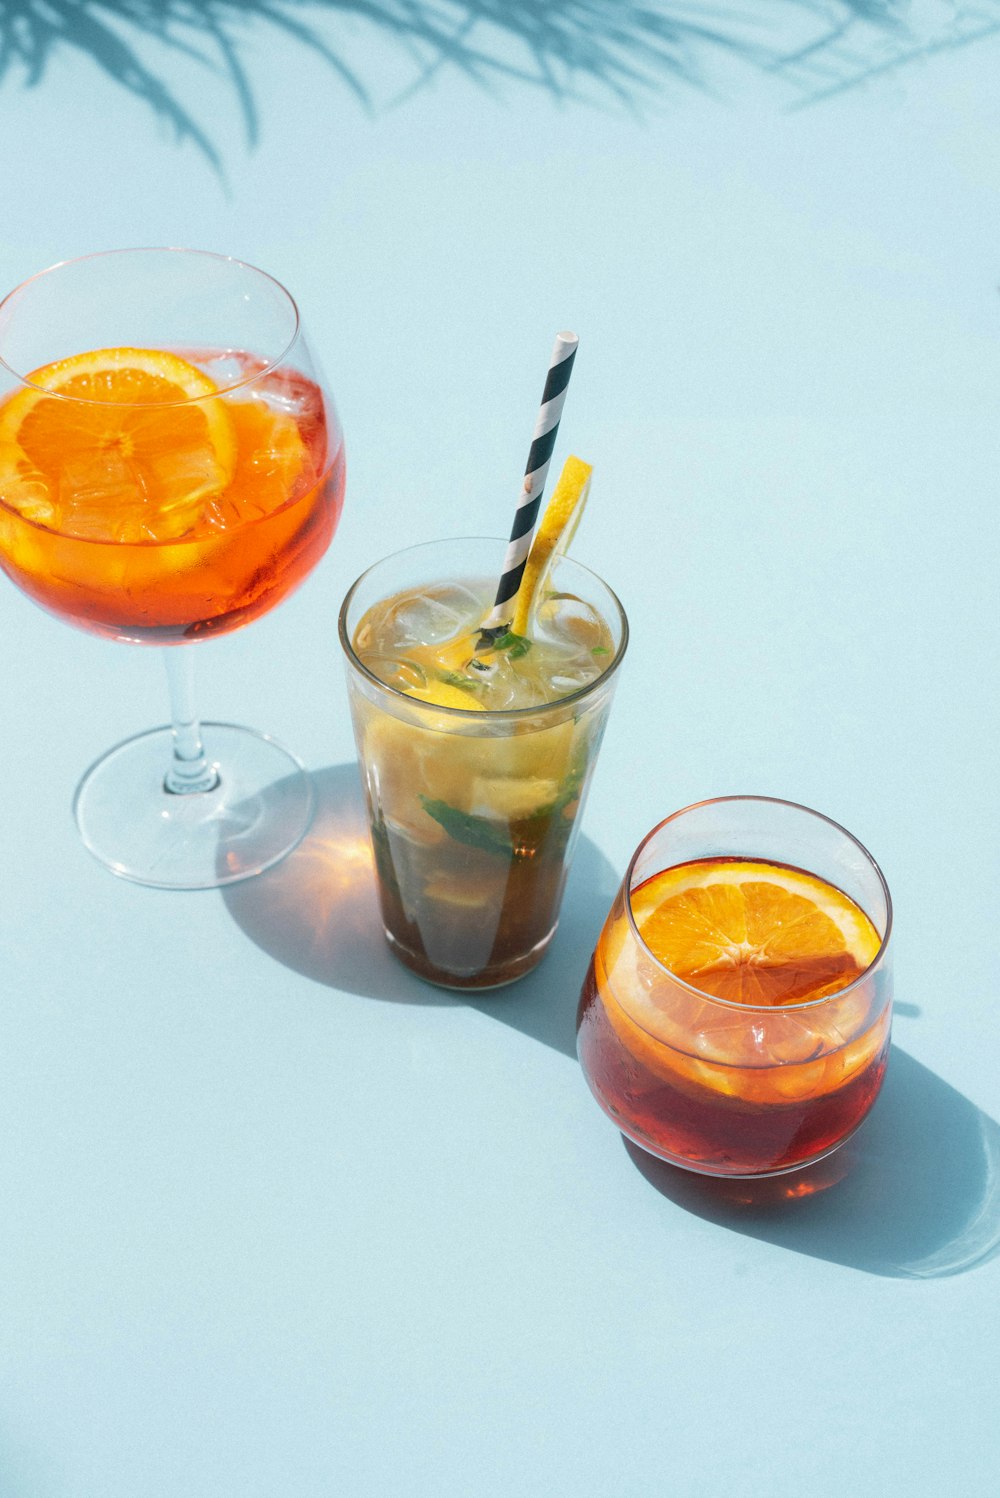 two clear drinking glasses with orange liquid